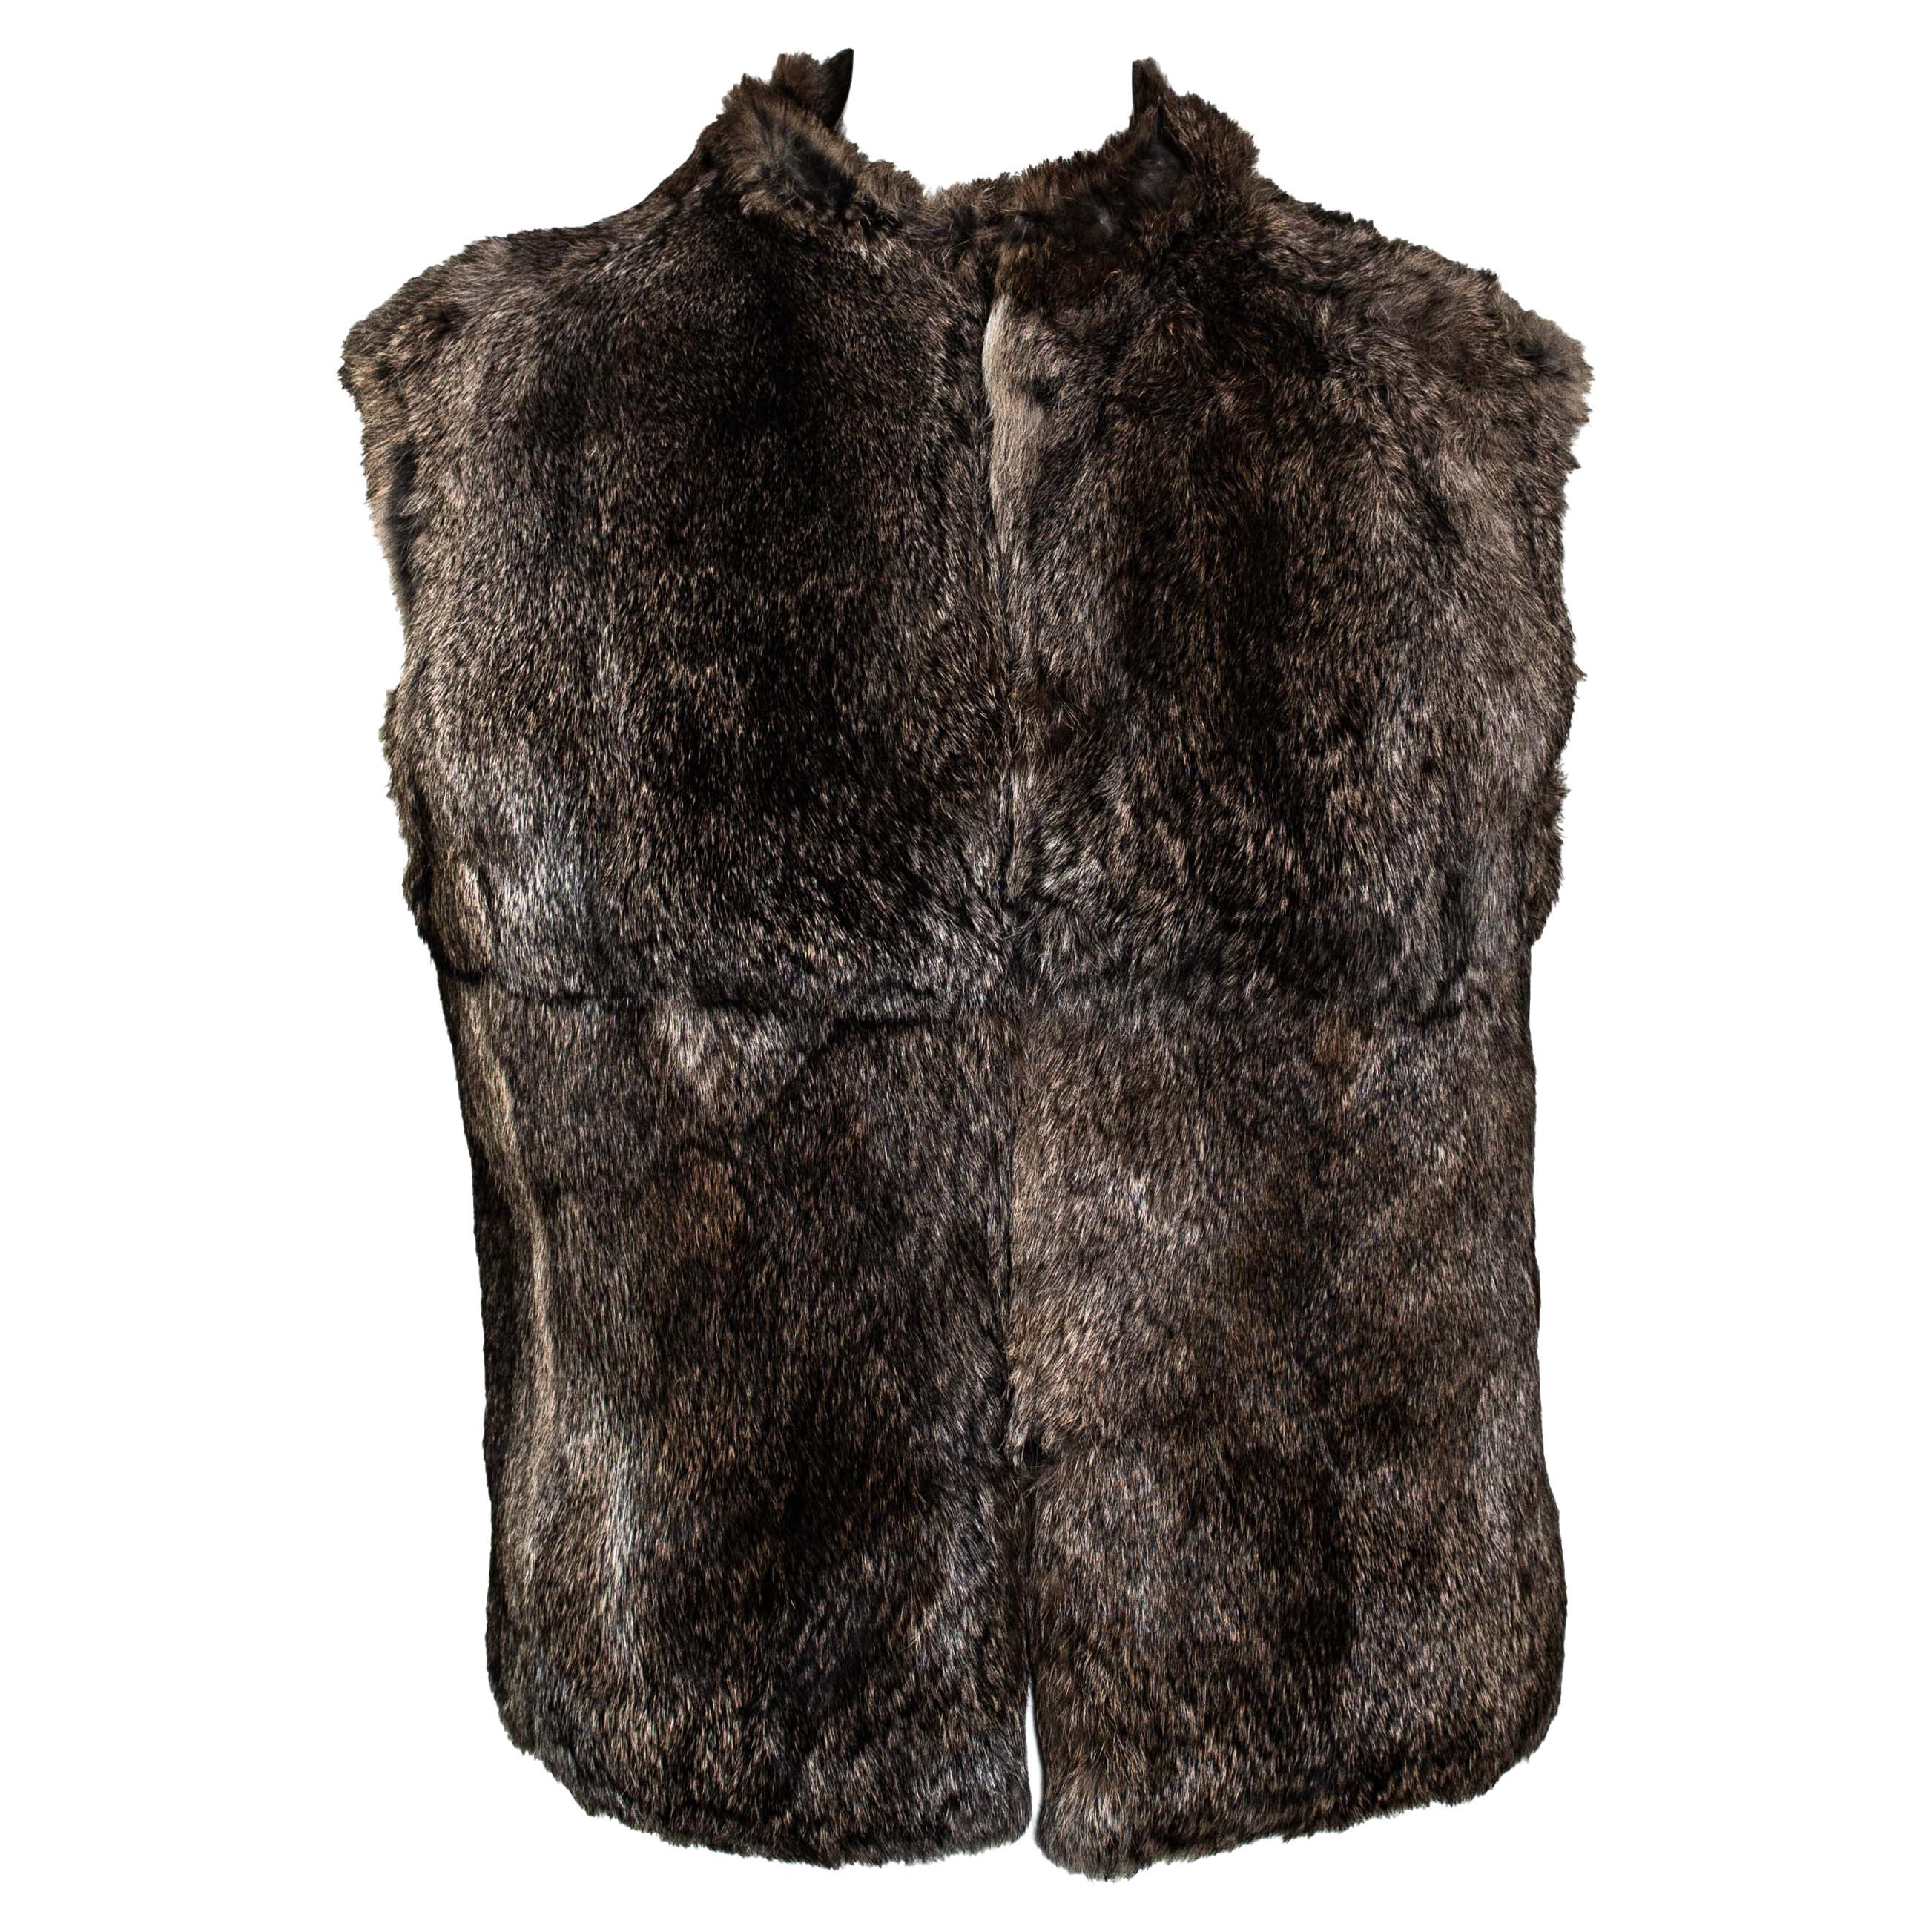 F/W 1999 Gucci by Tom Ford Calf Hair Reversible Rabbit Fur Vest  In Good Condition For Sale In West Hollywood, CA